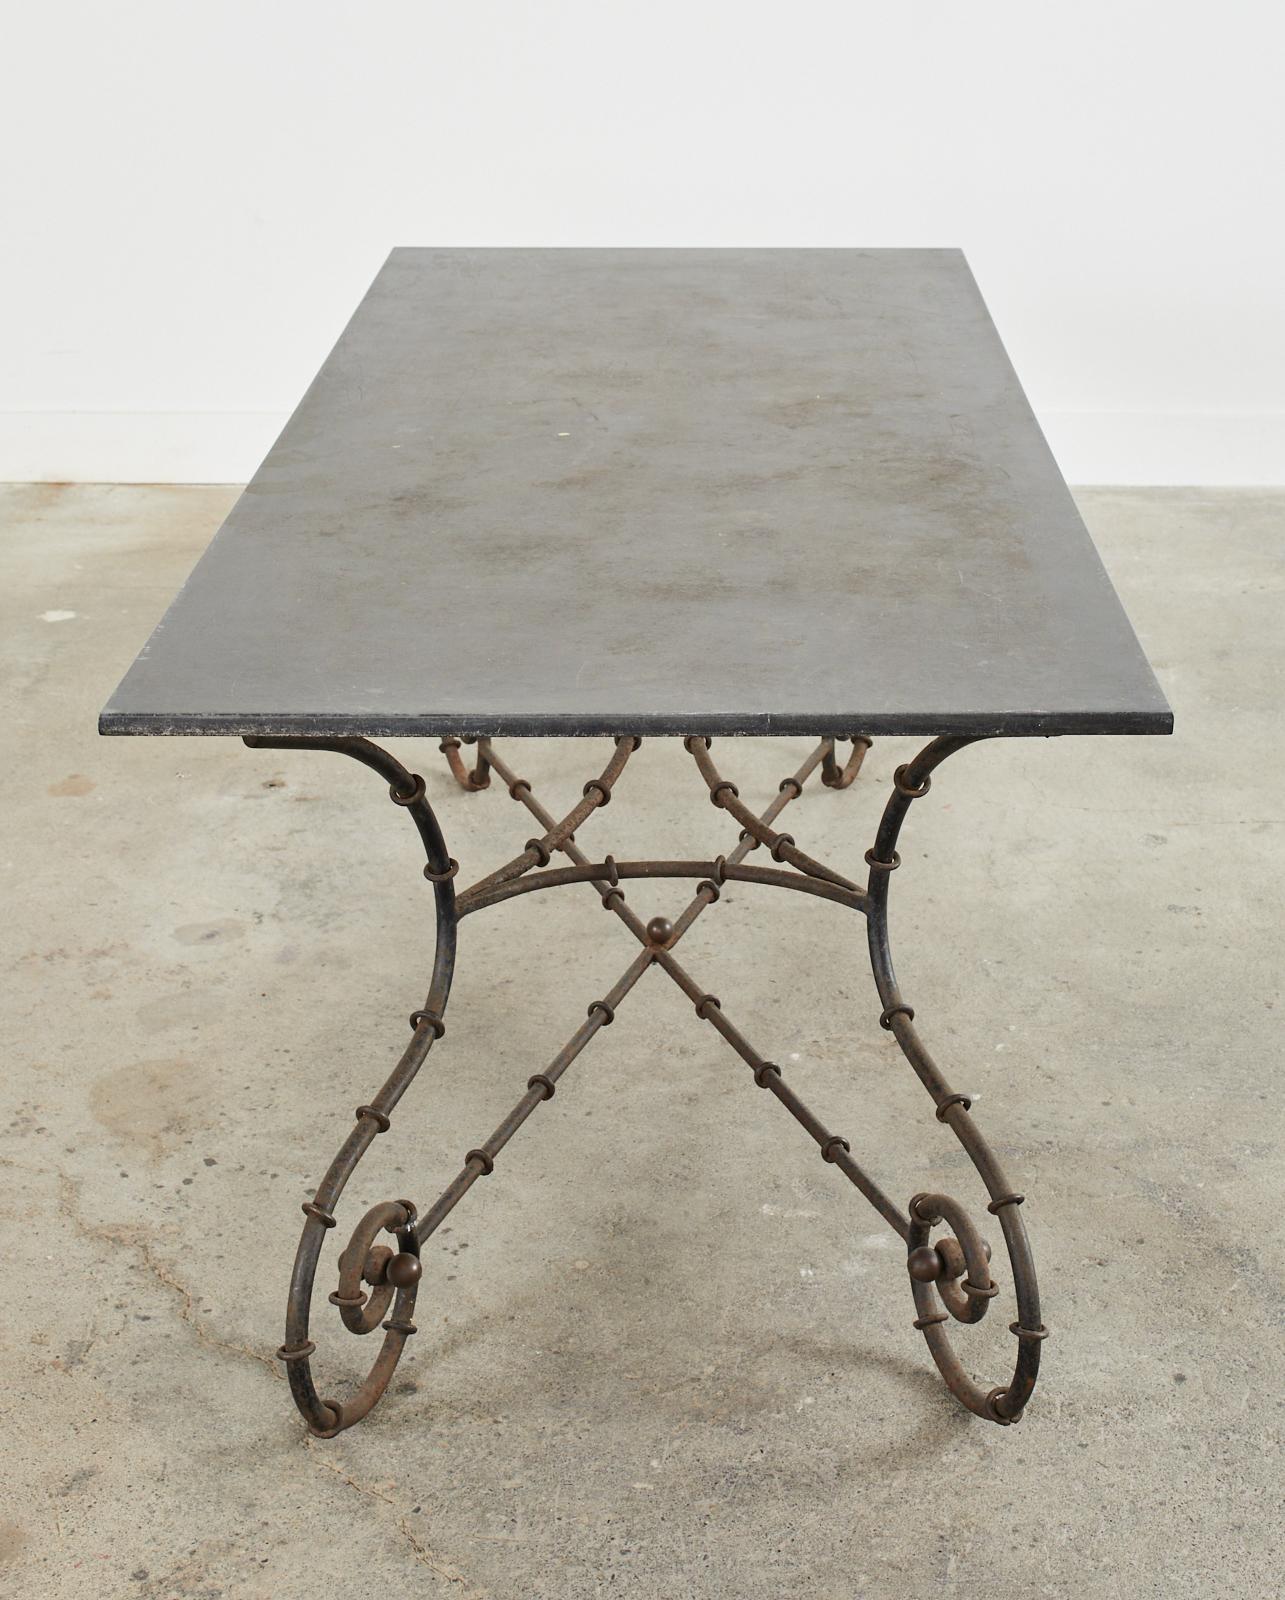 20th Century Mid-century Faux Bamboo Iron Slate Top Garden Dining Table For Sale